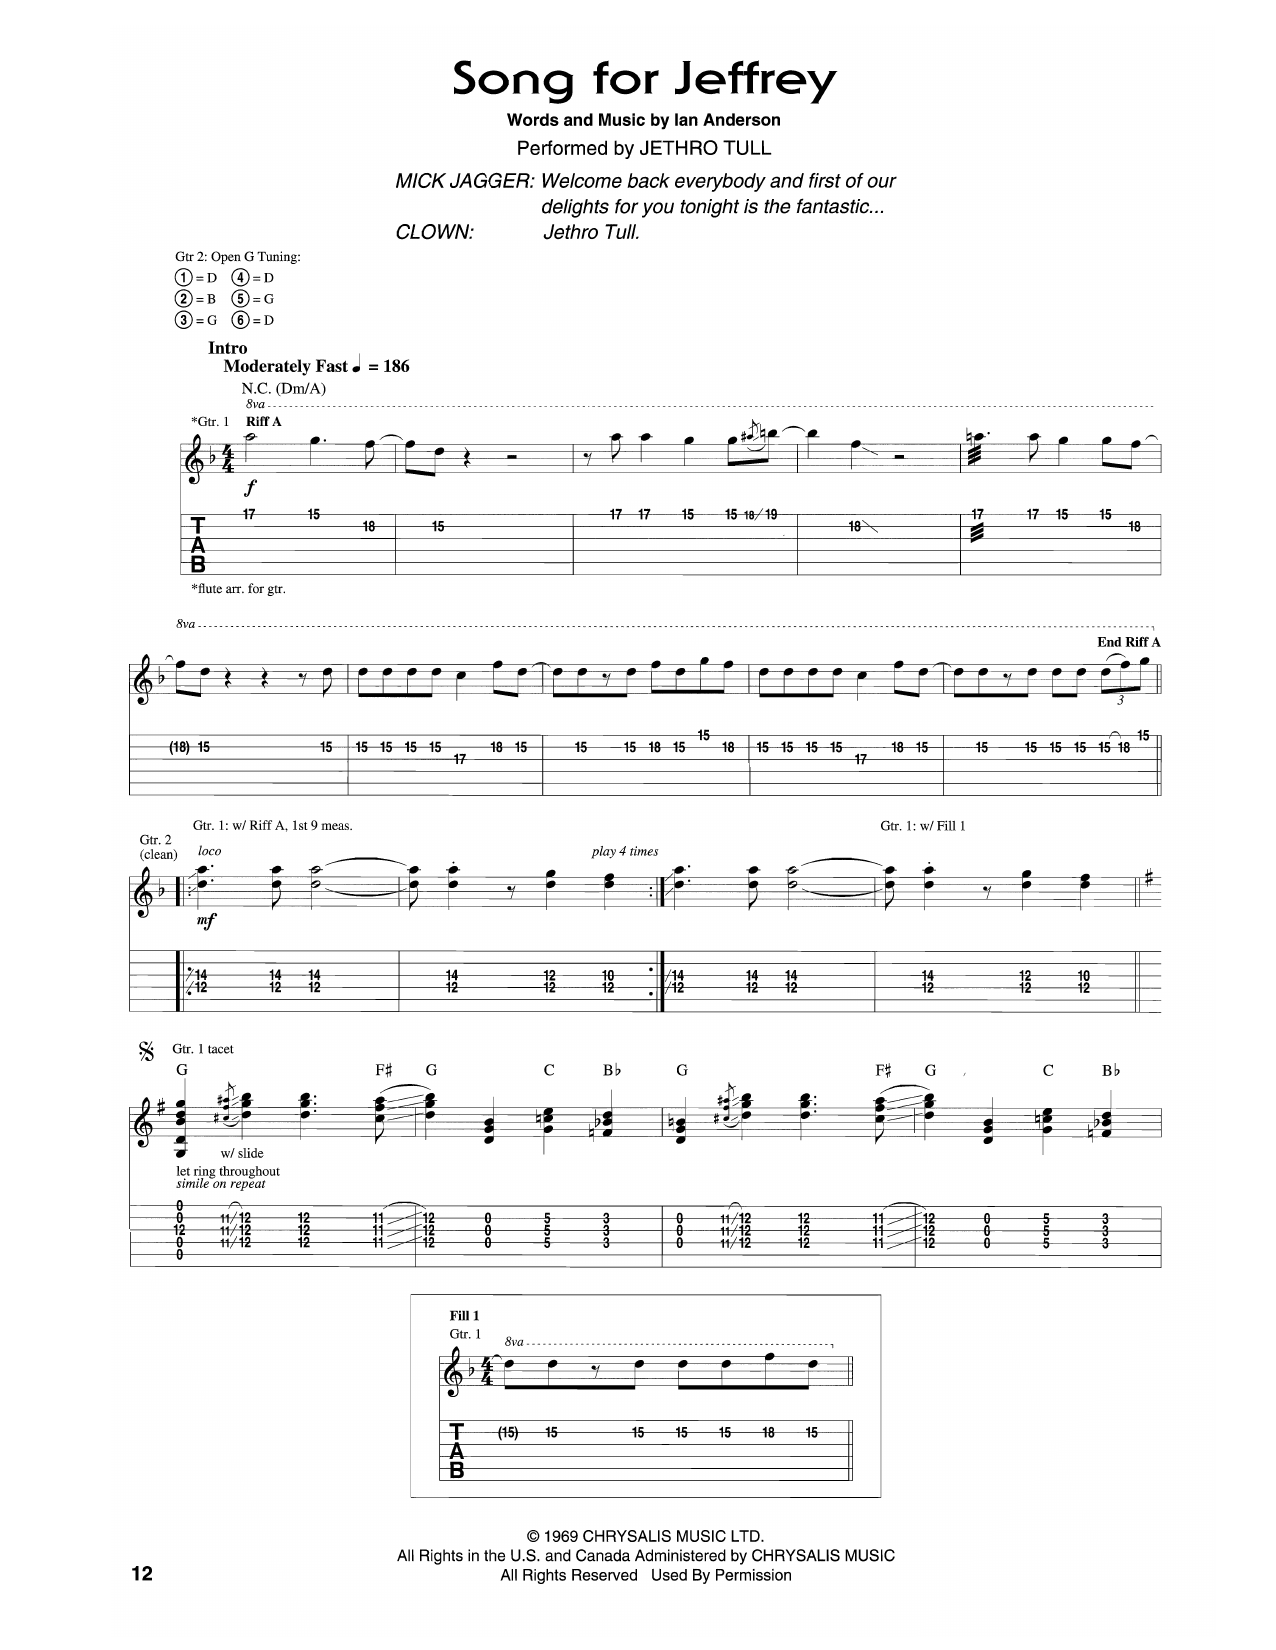 Rolling Stones Song For Jeffrey sheet music notes printable PDF score